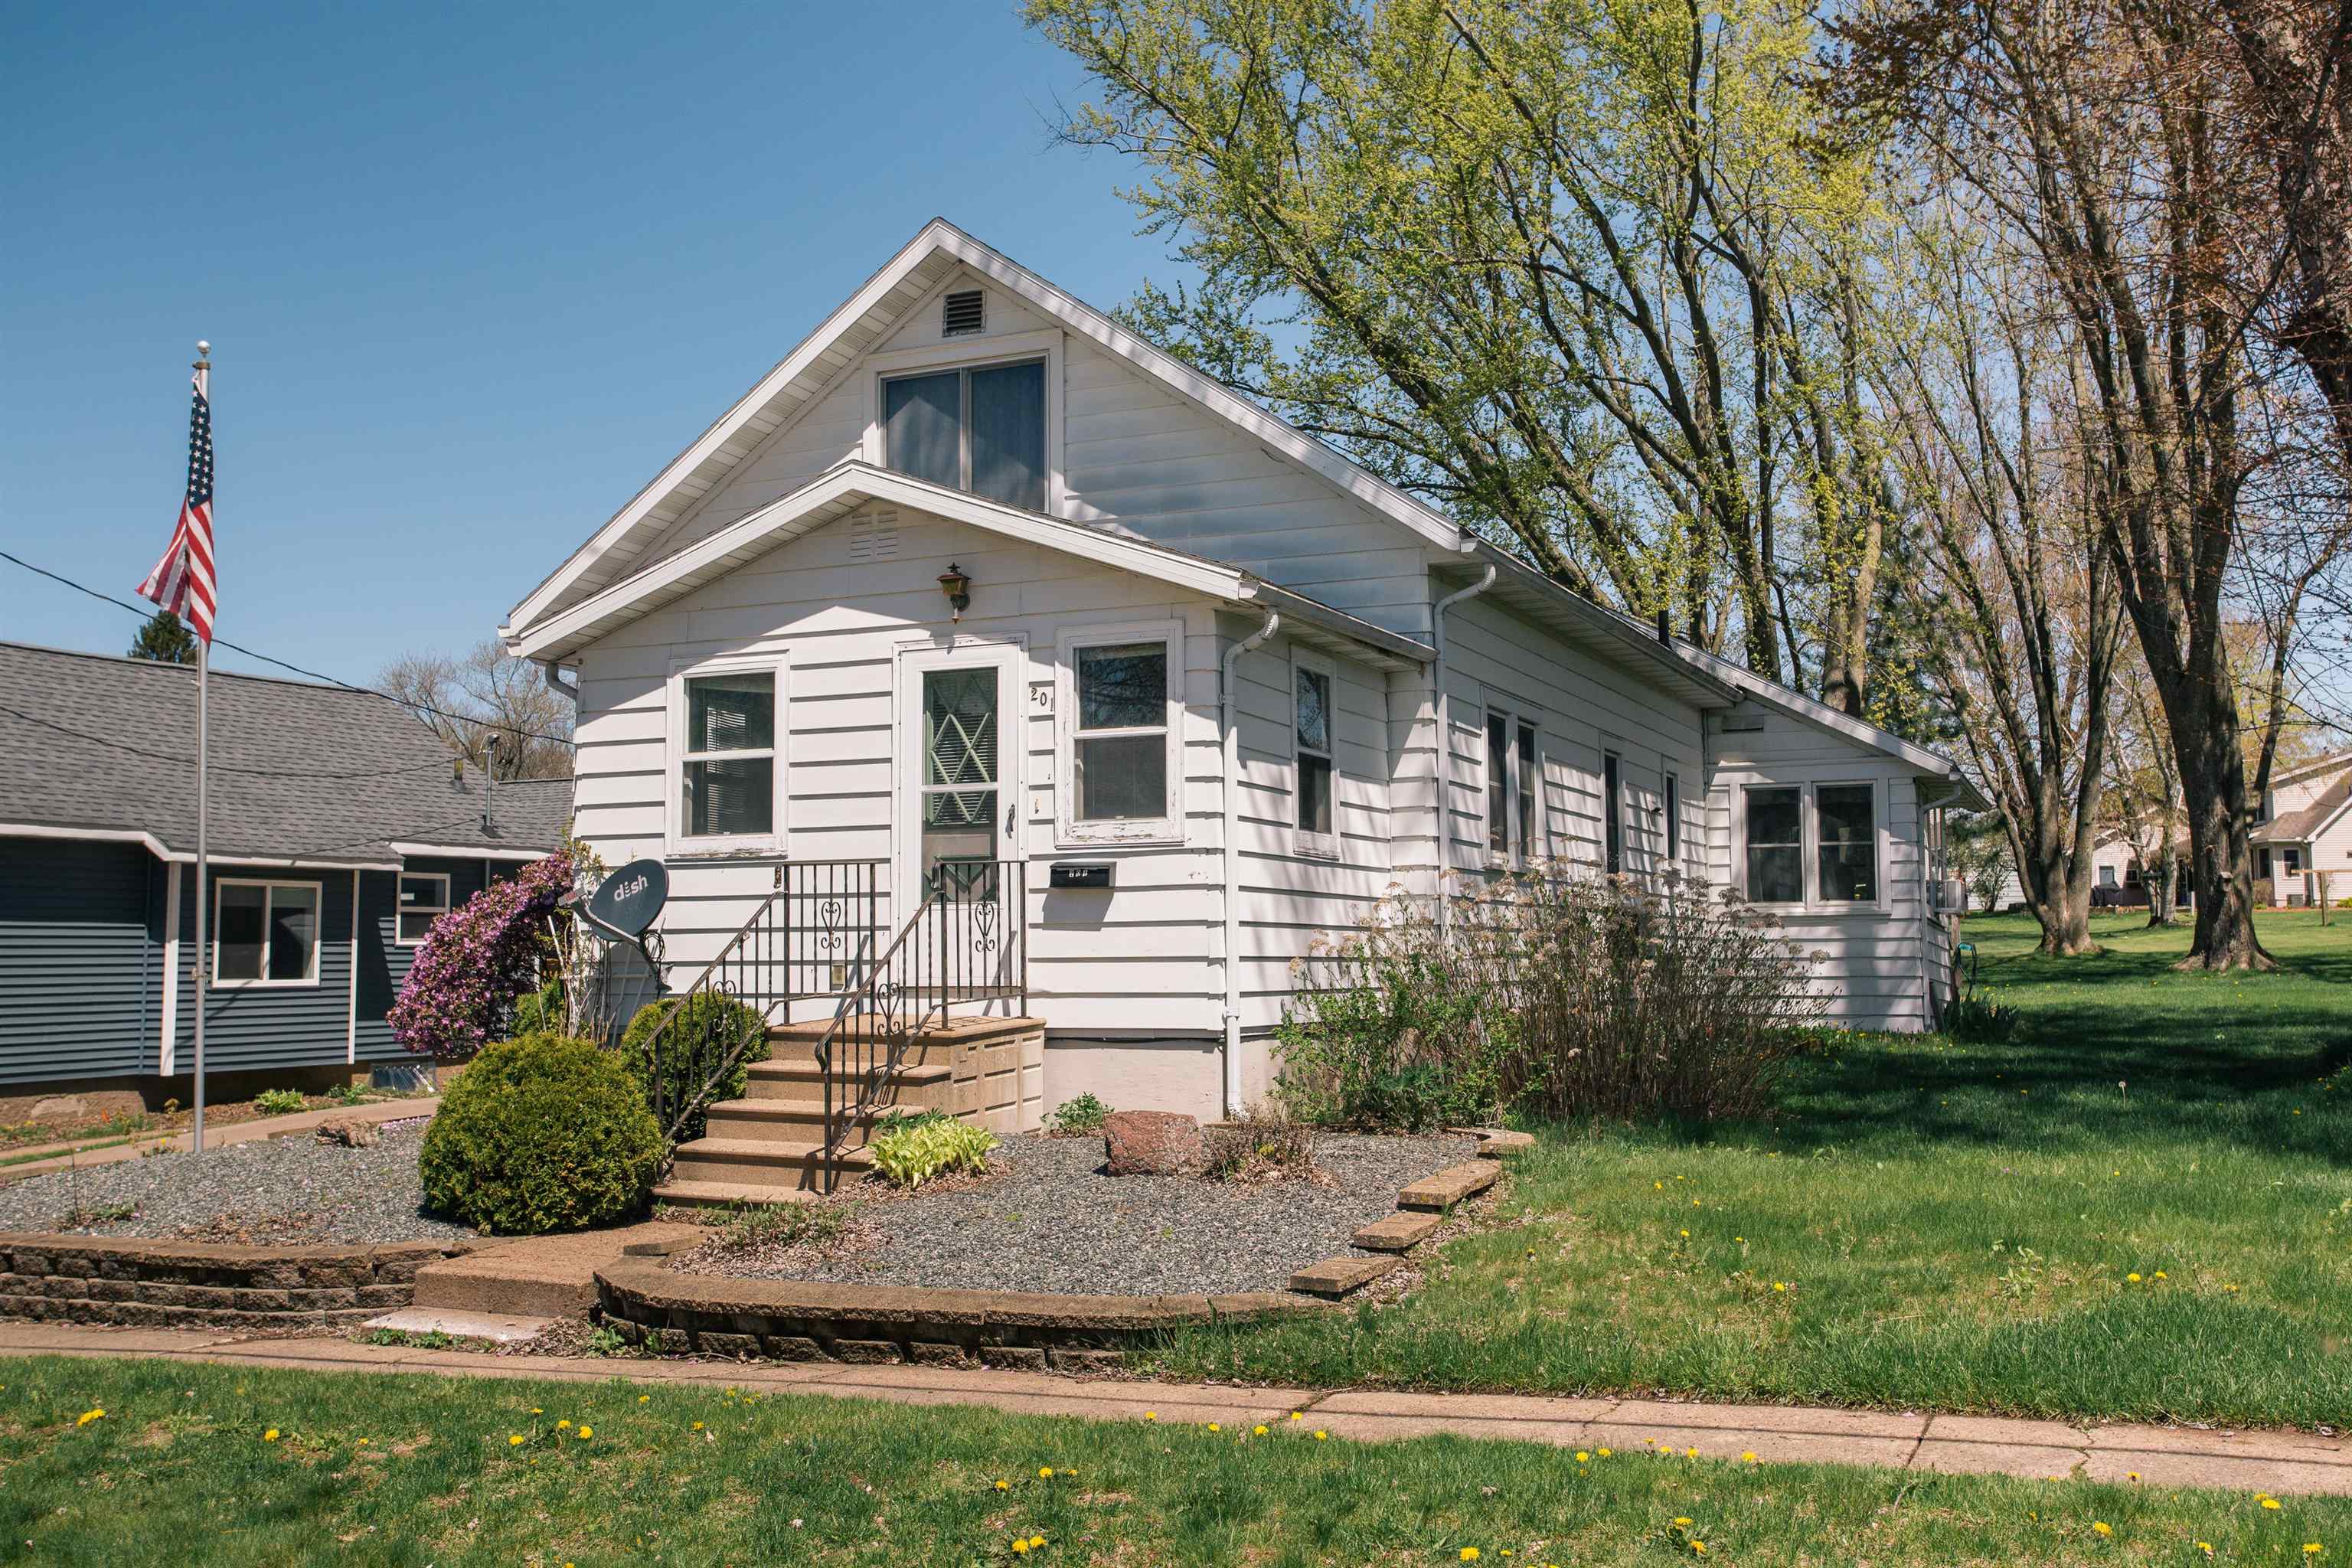 201 E 12TH STREET, Neillsville, Wisconsin 54456, 3 Bedrooms Bedrooms, ,1 BathroomBathrooms,Residential,For Sale,201 E 12TH STREET,22401709